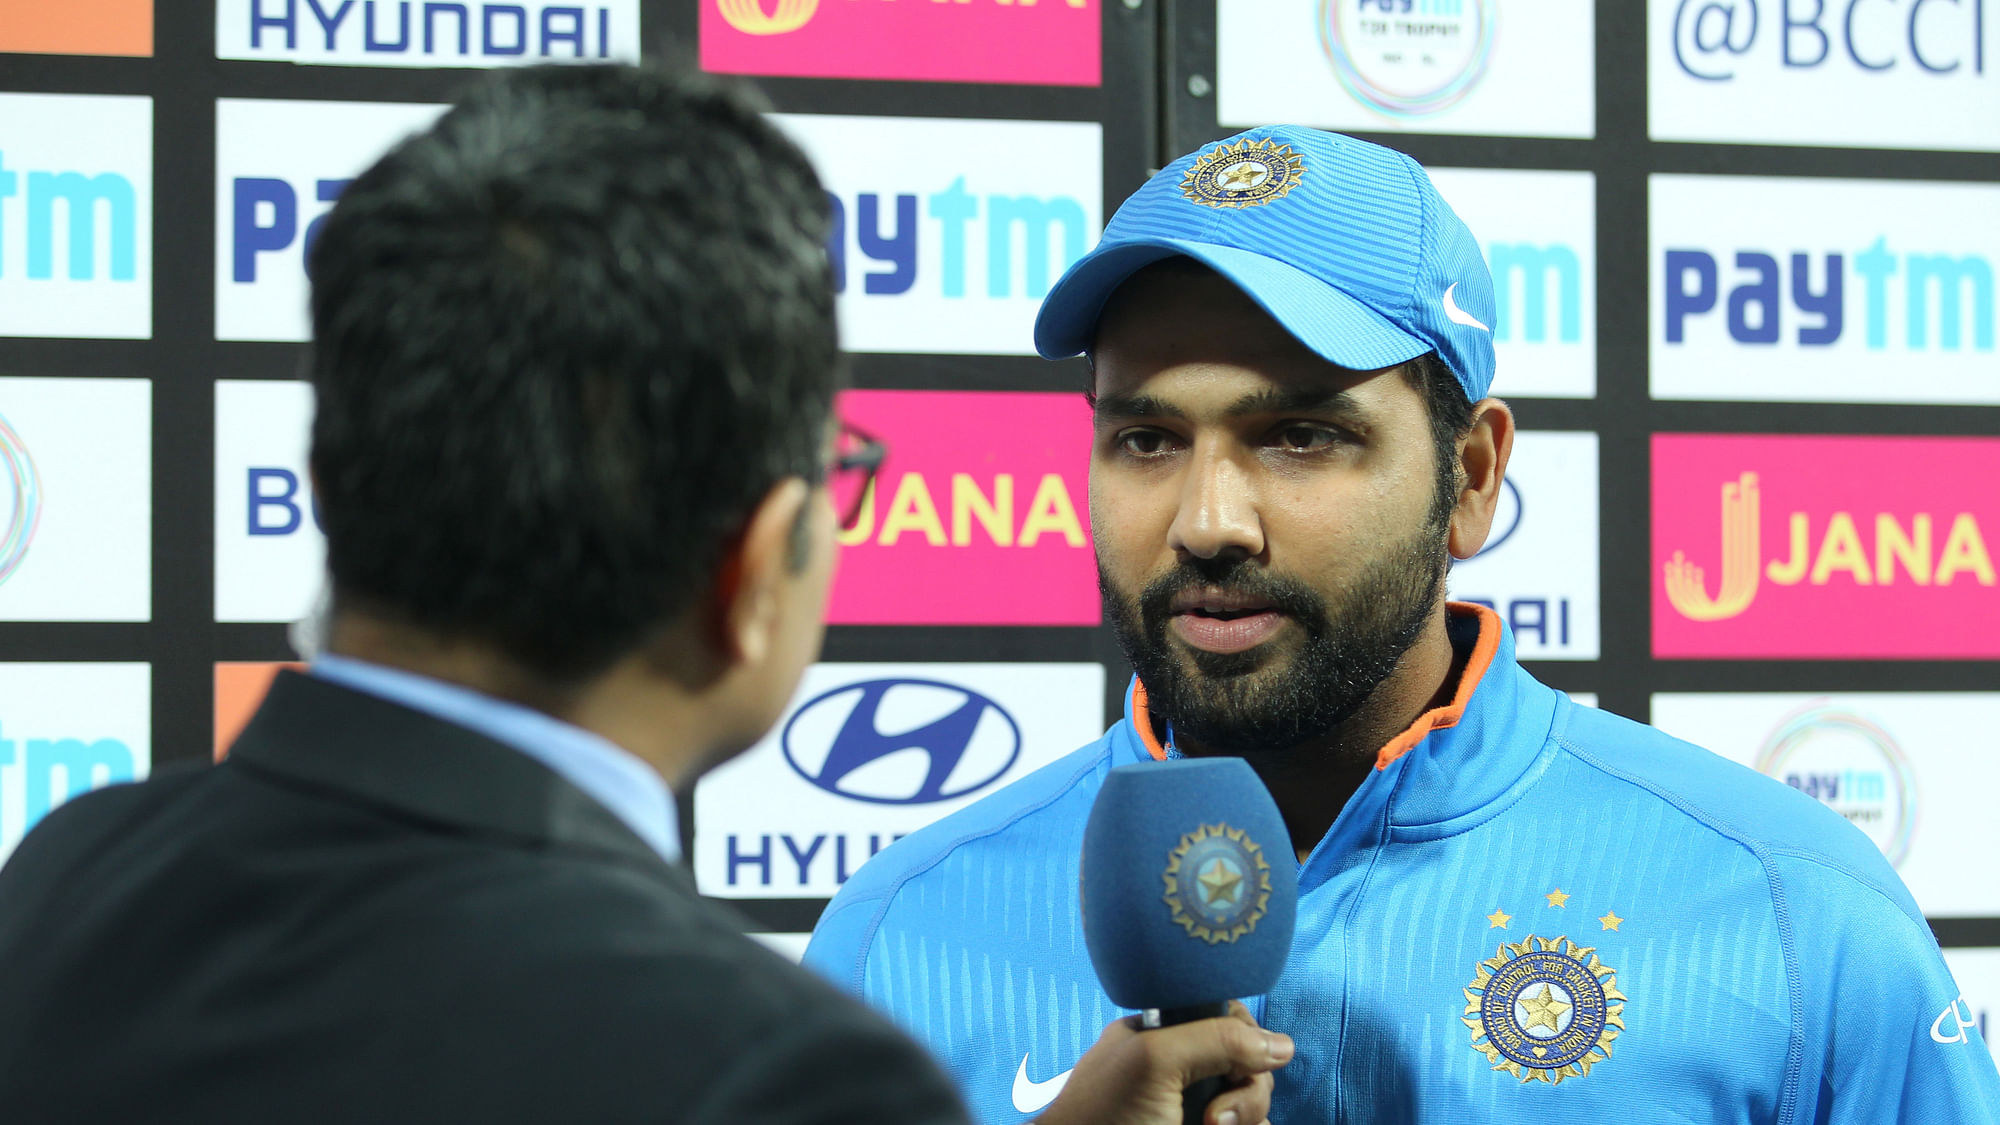 Rohit Sharma was adjudged the Man of the Match for his 43-ball 118.